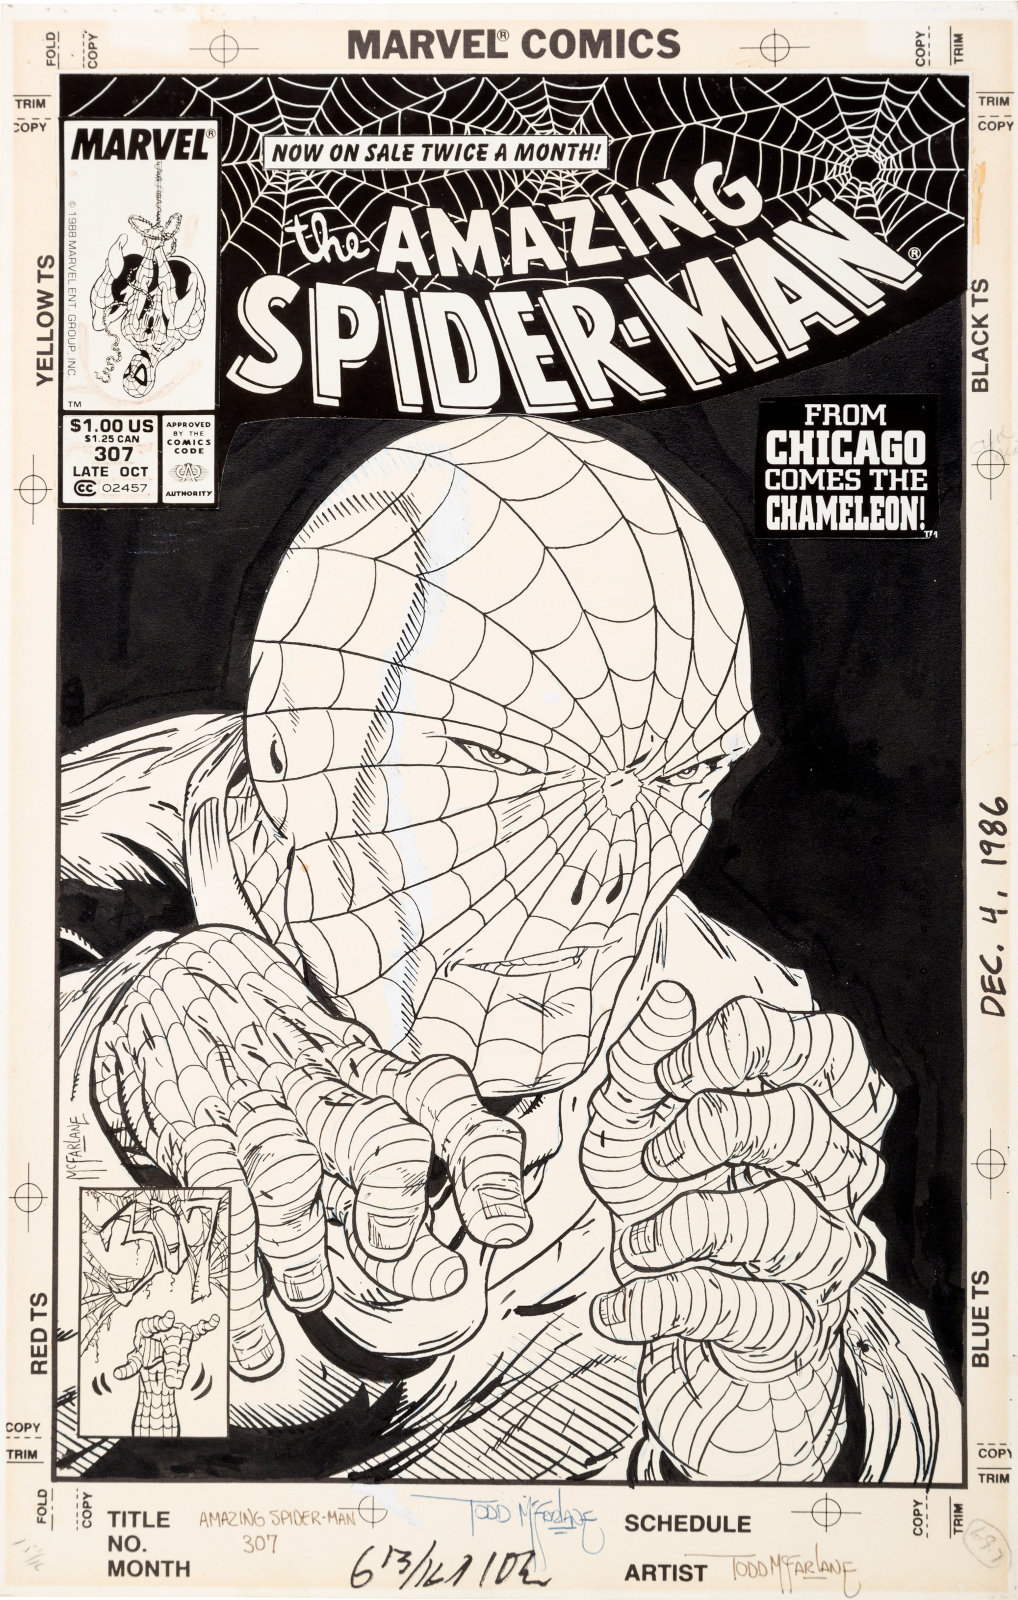 Amazing Spider Man issue 307 cover by Todd McFarlane